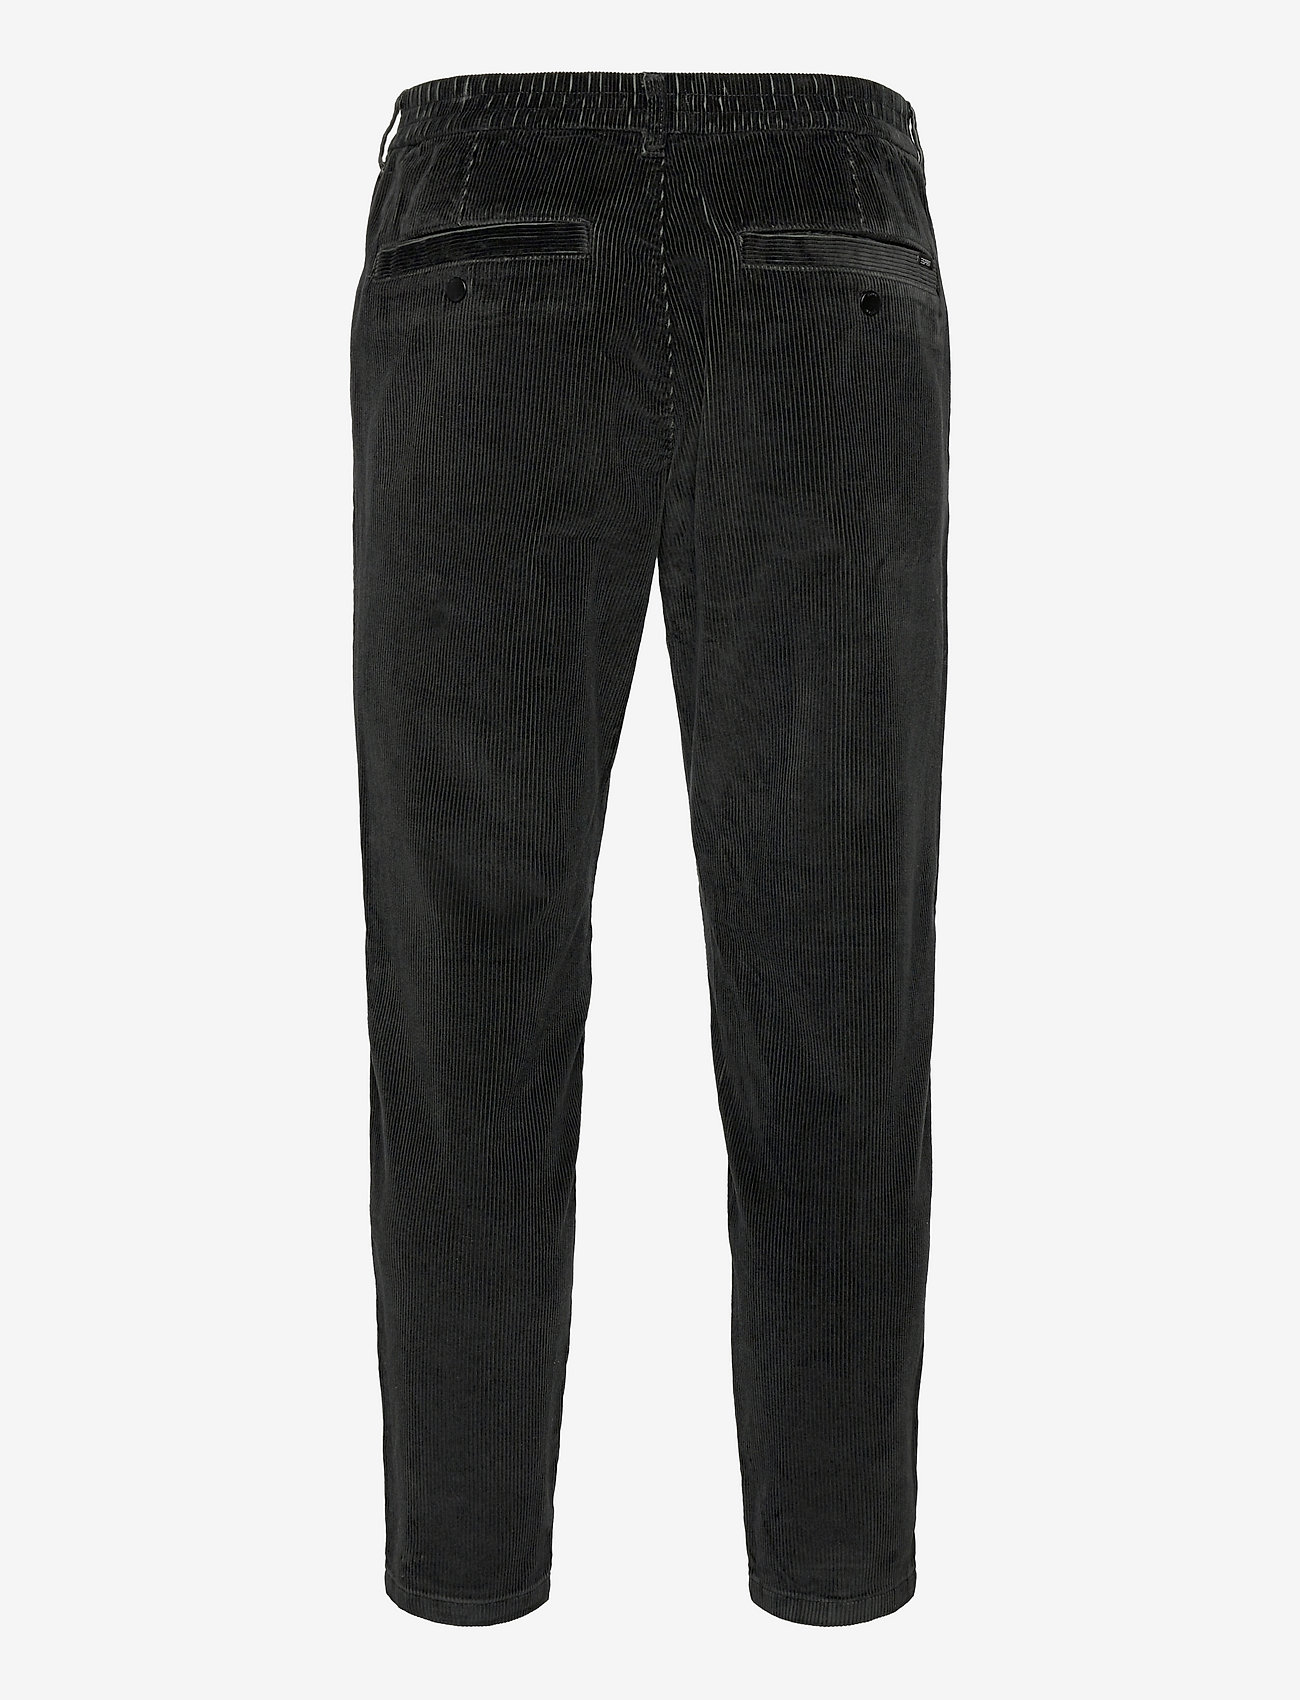 Esprit Casual - Pants woven - casual - anthracite - 1